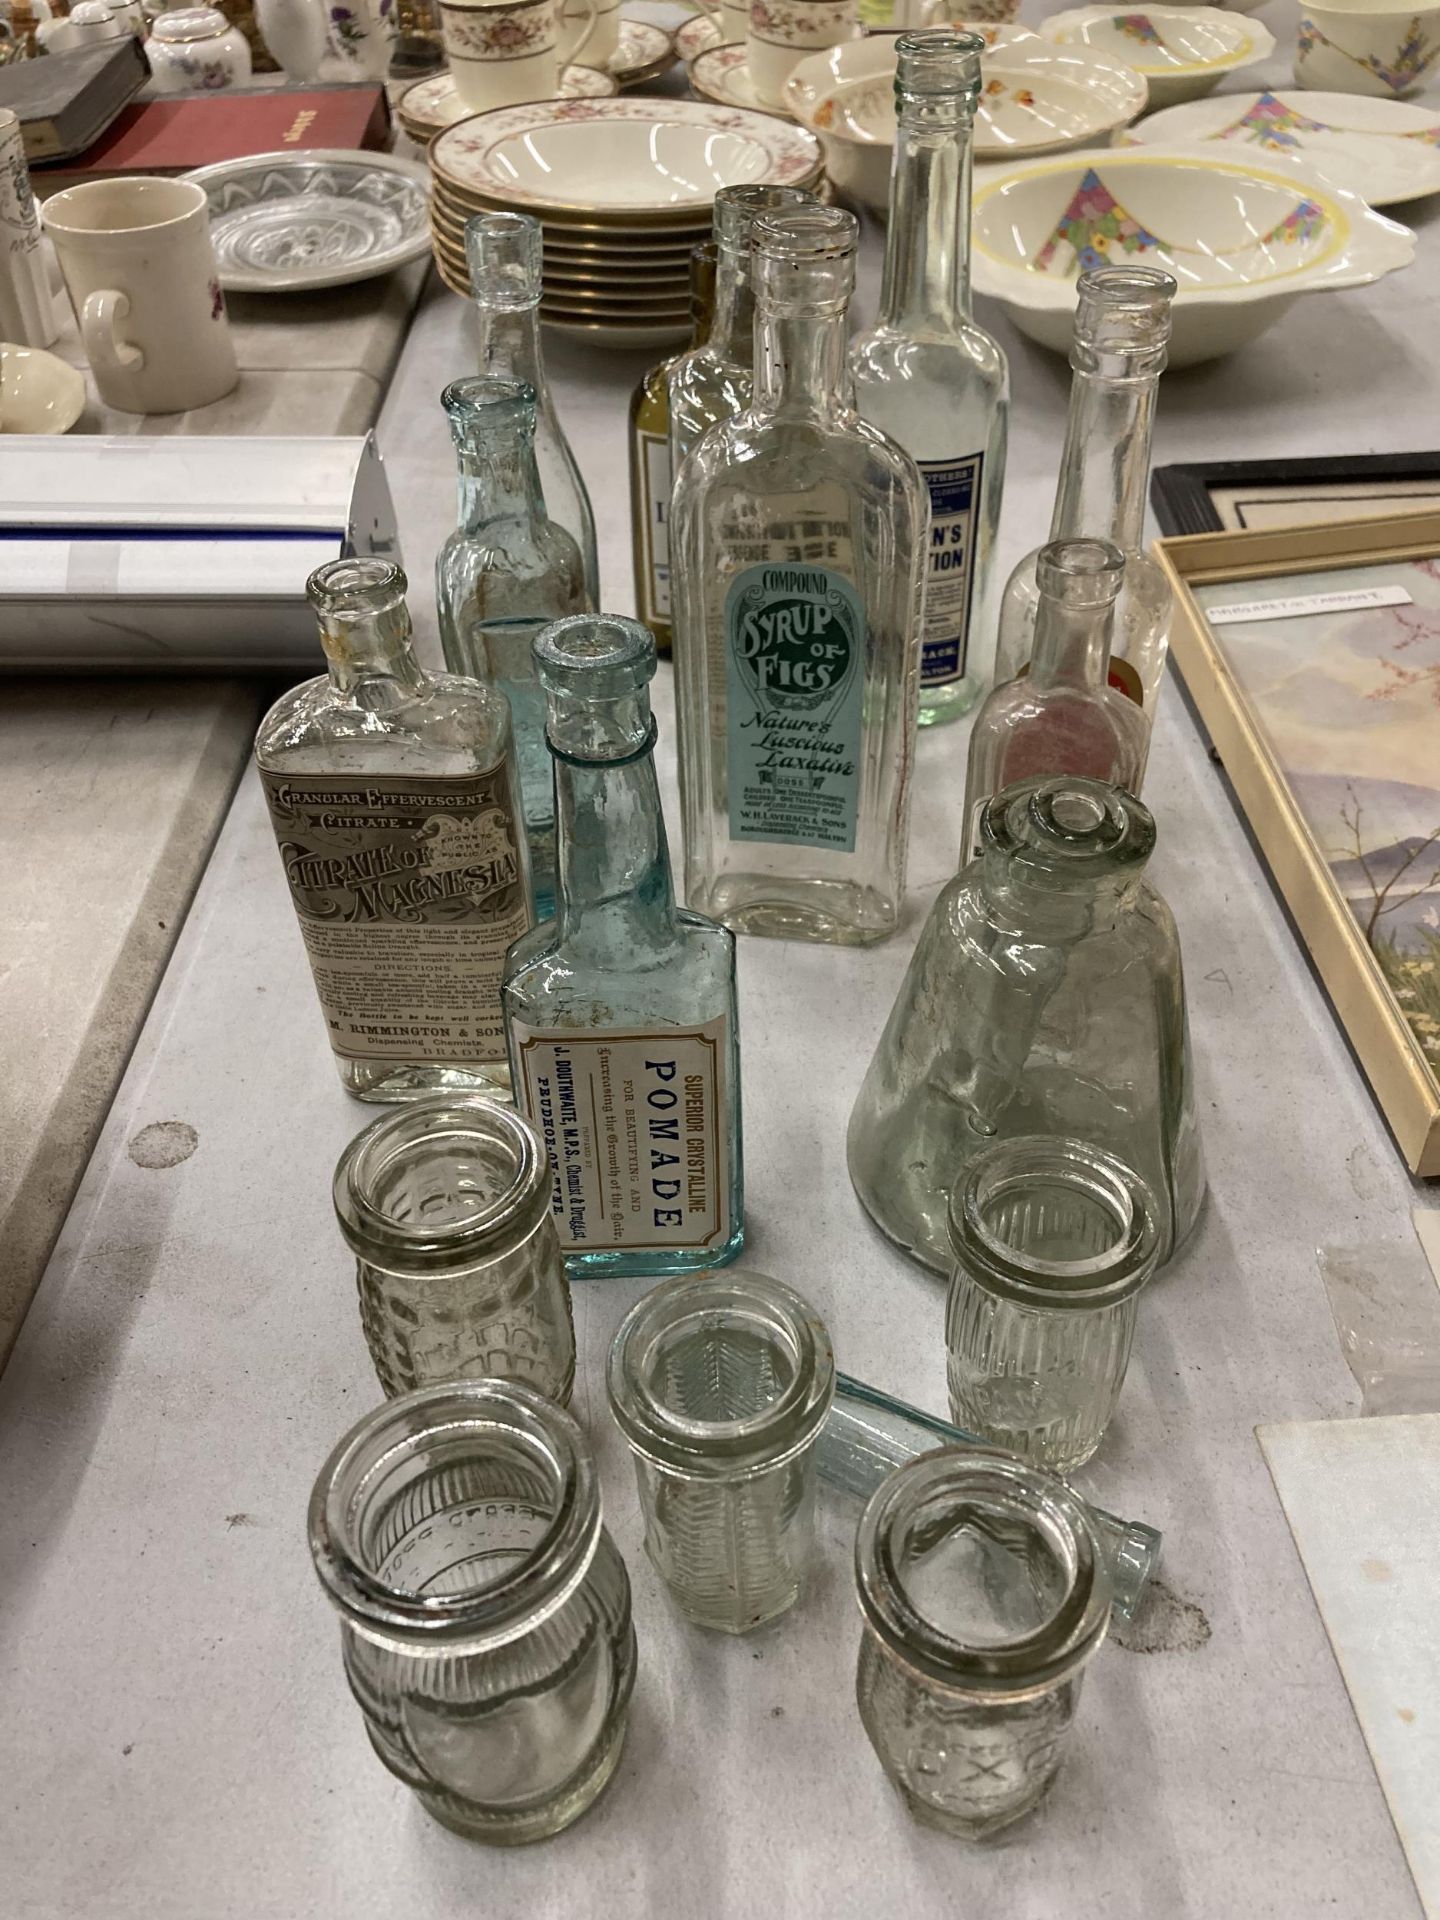 ACOLLECTION OF VINTAGE ADVERTISING BOTTLES TO INCLUDE OXO, LAVENDER WATER, SYRUP OF FIGS, ETC